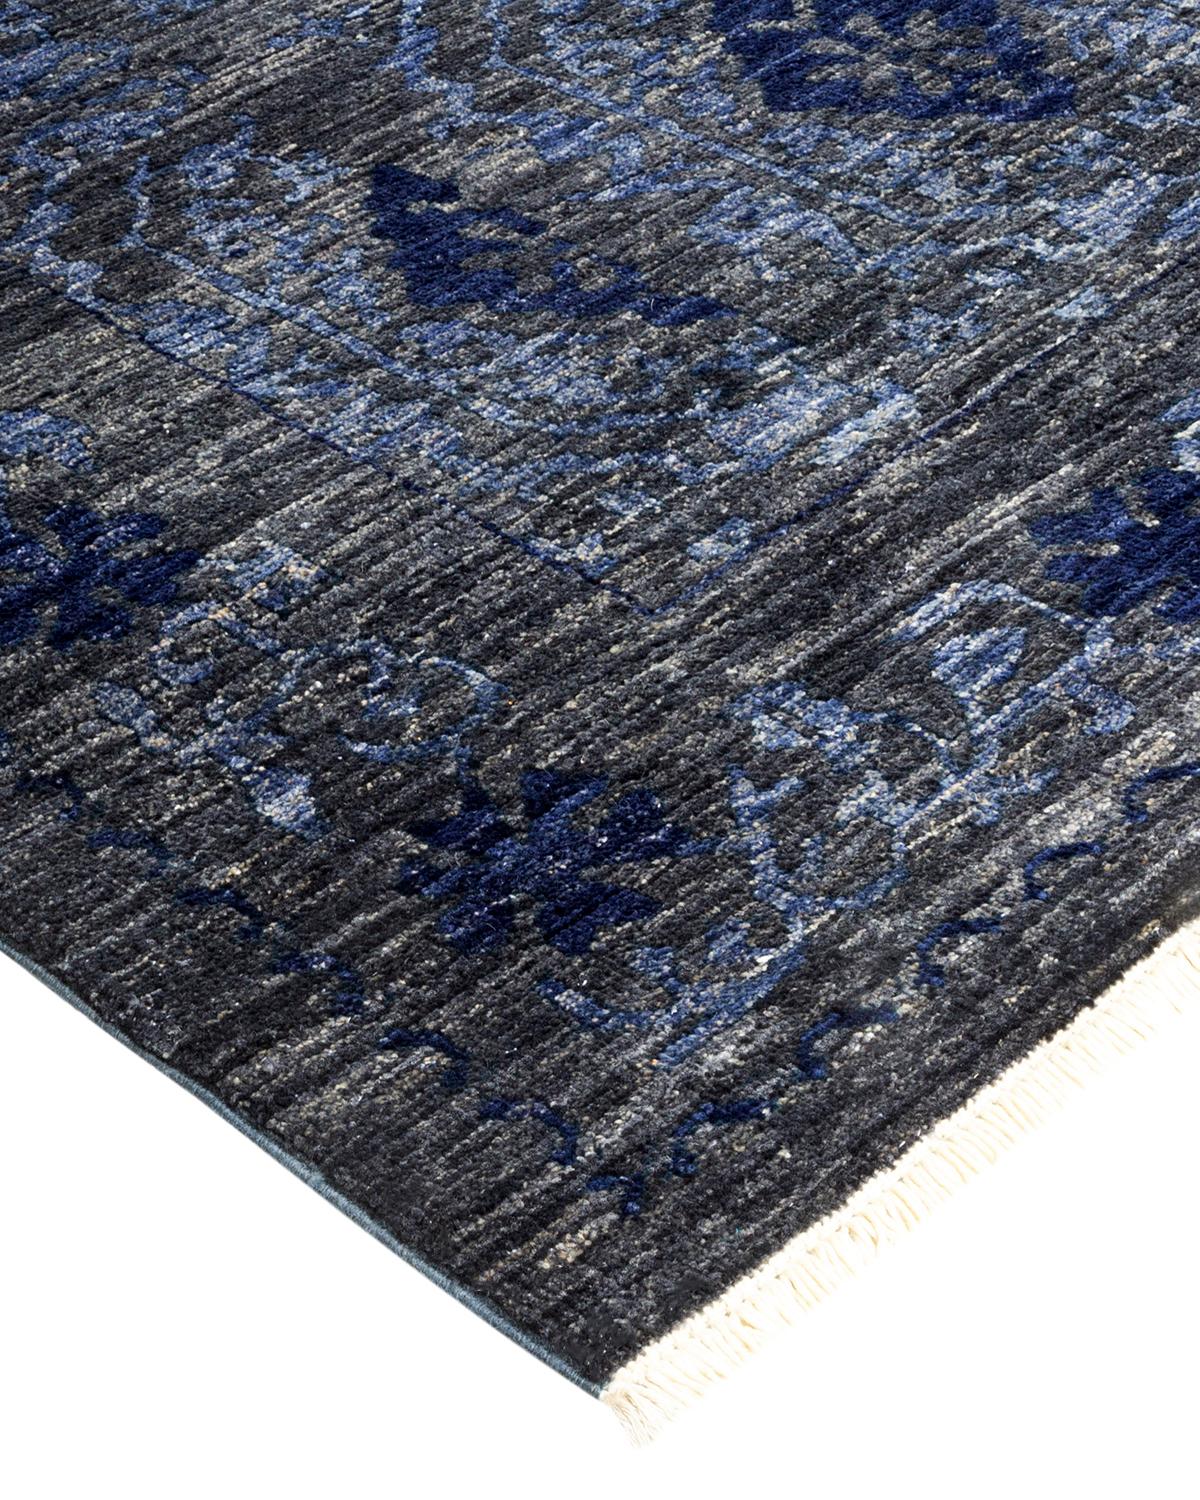 With an amalgam of sizes and aesthetic influences ranging from Art Deco to Rorschach and modernist, the rugs in the Eclectic collection defy definition, asking instead to become intriguing focal points of a room. They are at once statement pieces